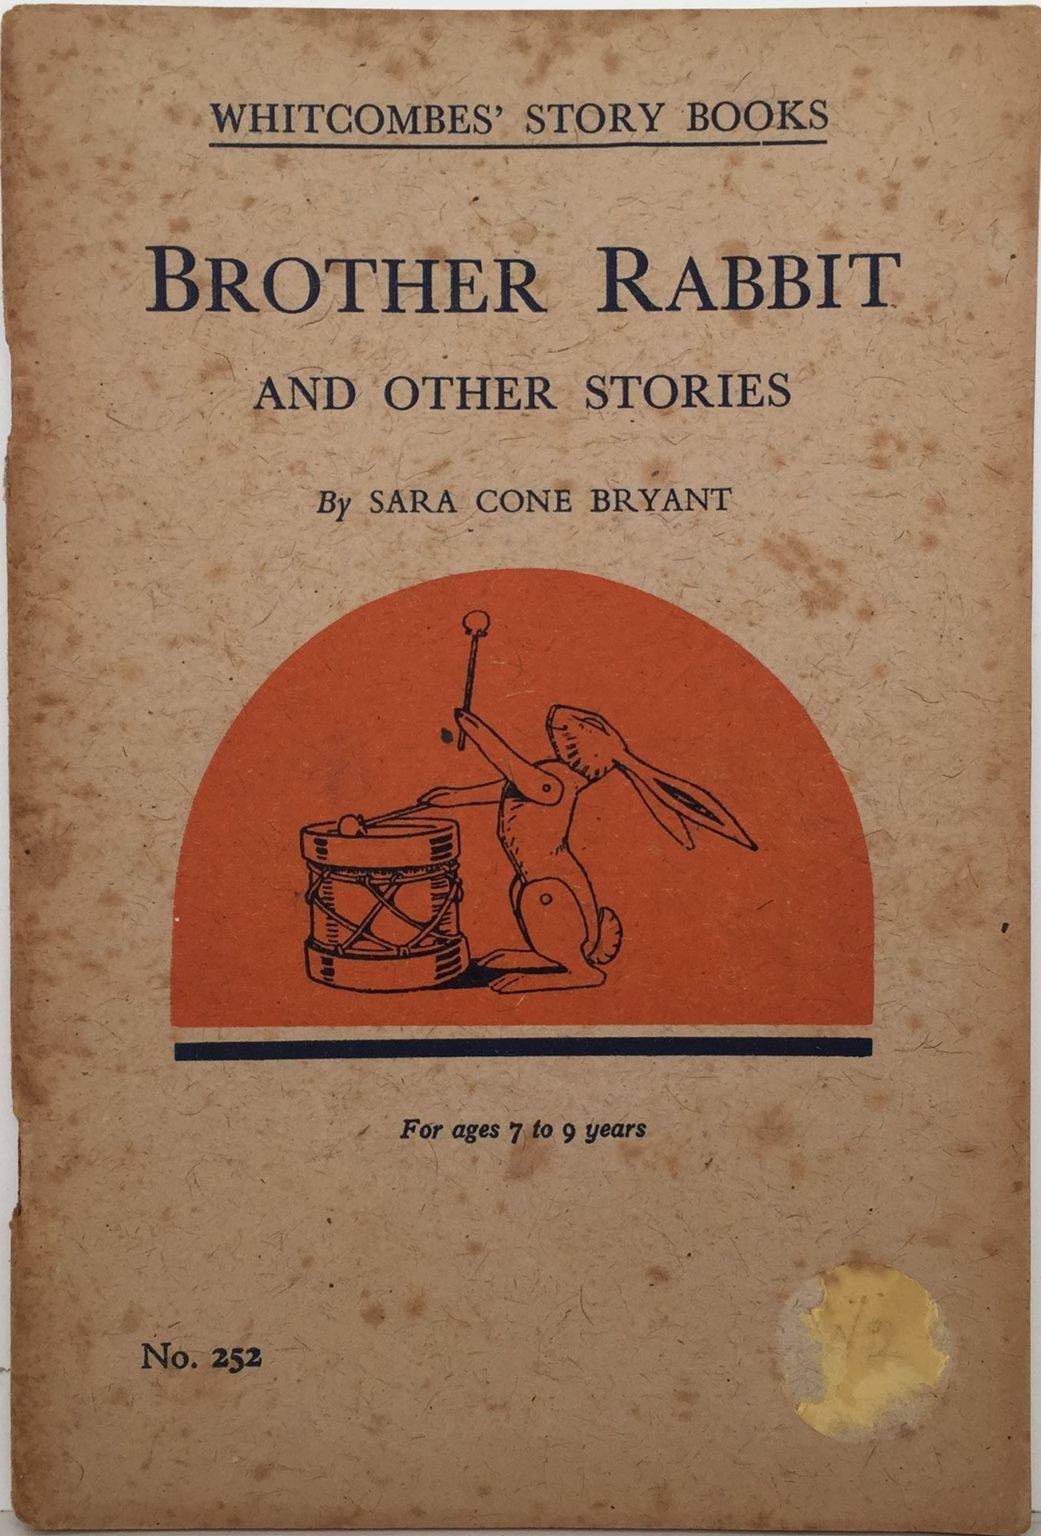 BROTHER RABBIT and Other Stories: Whitcombe's Story Books No 252